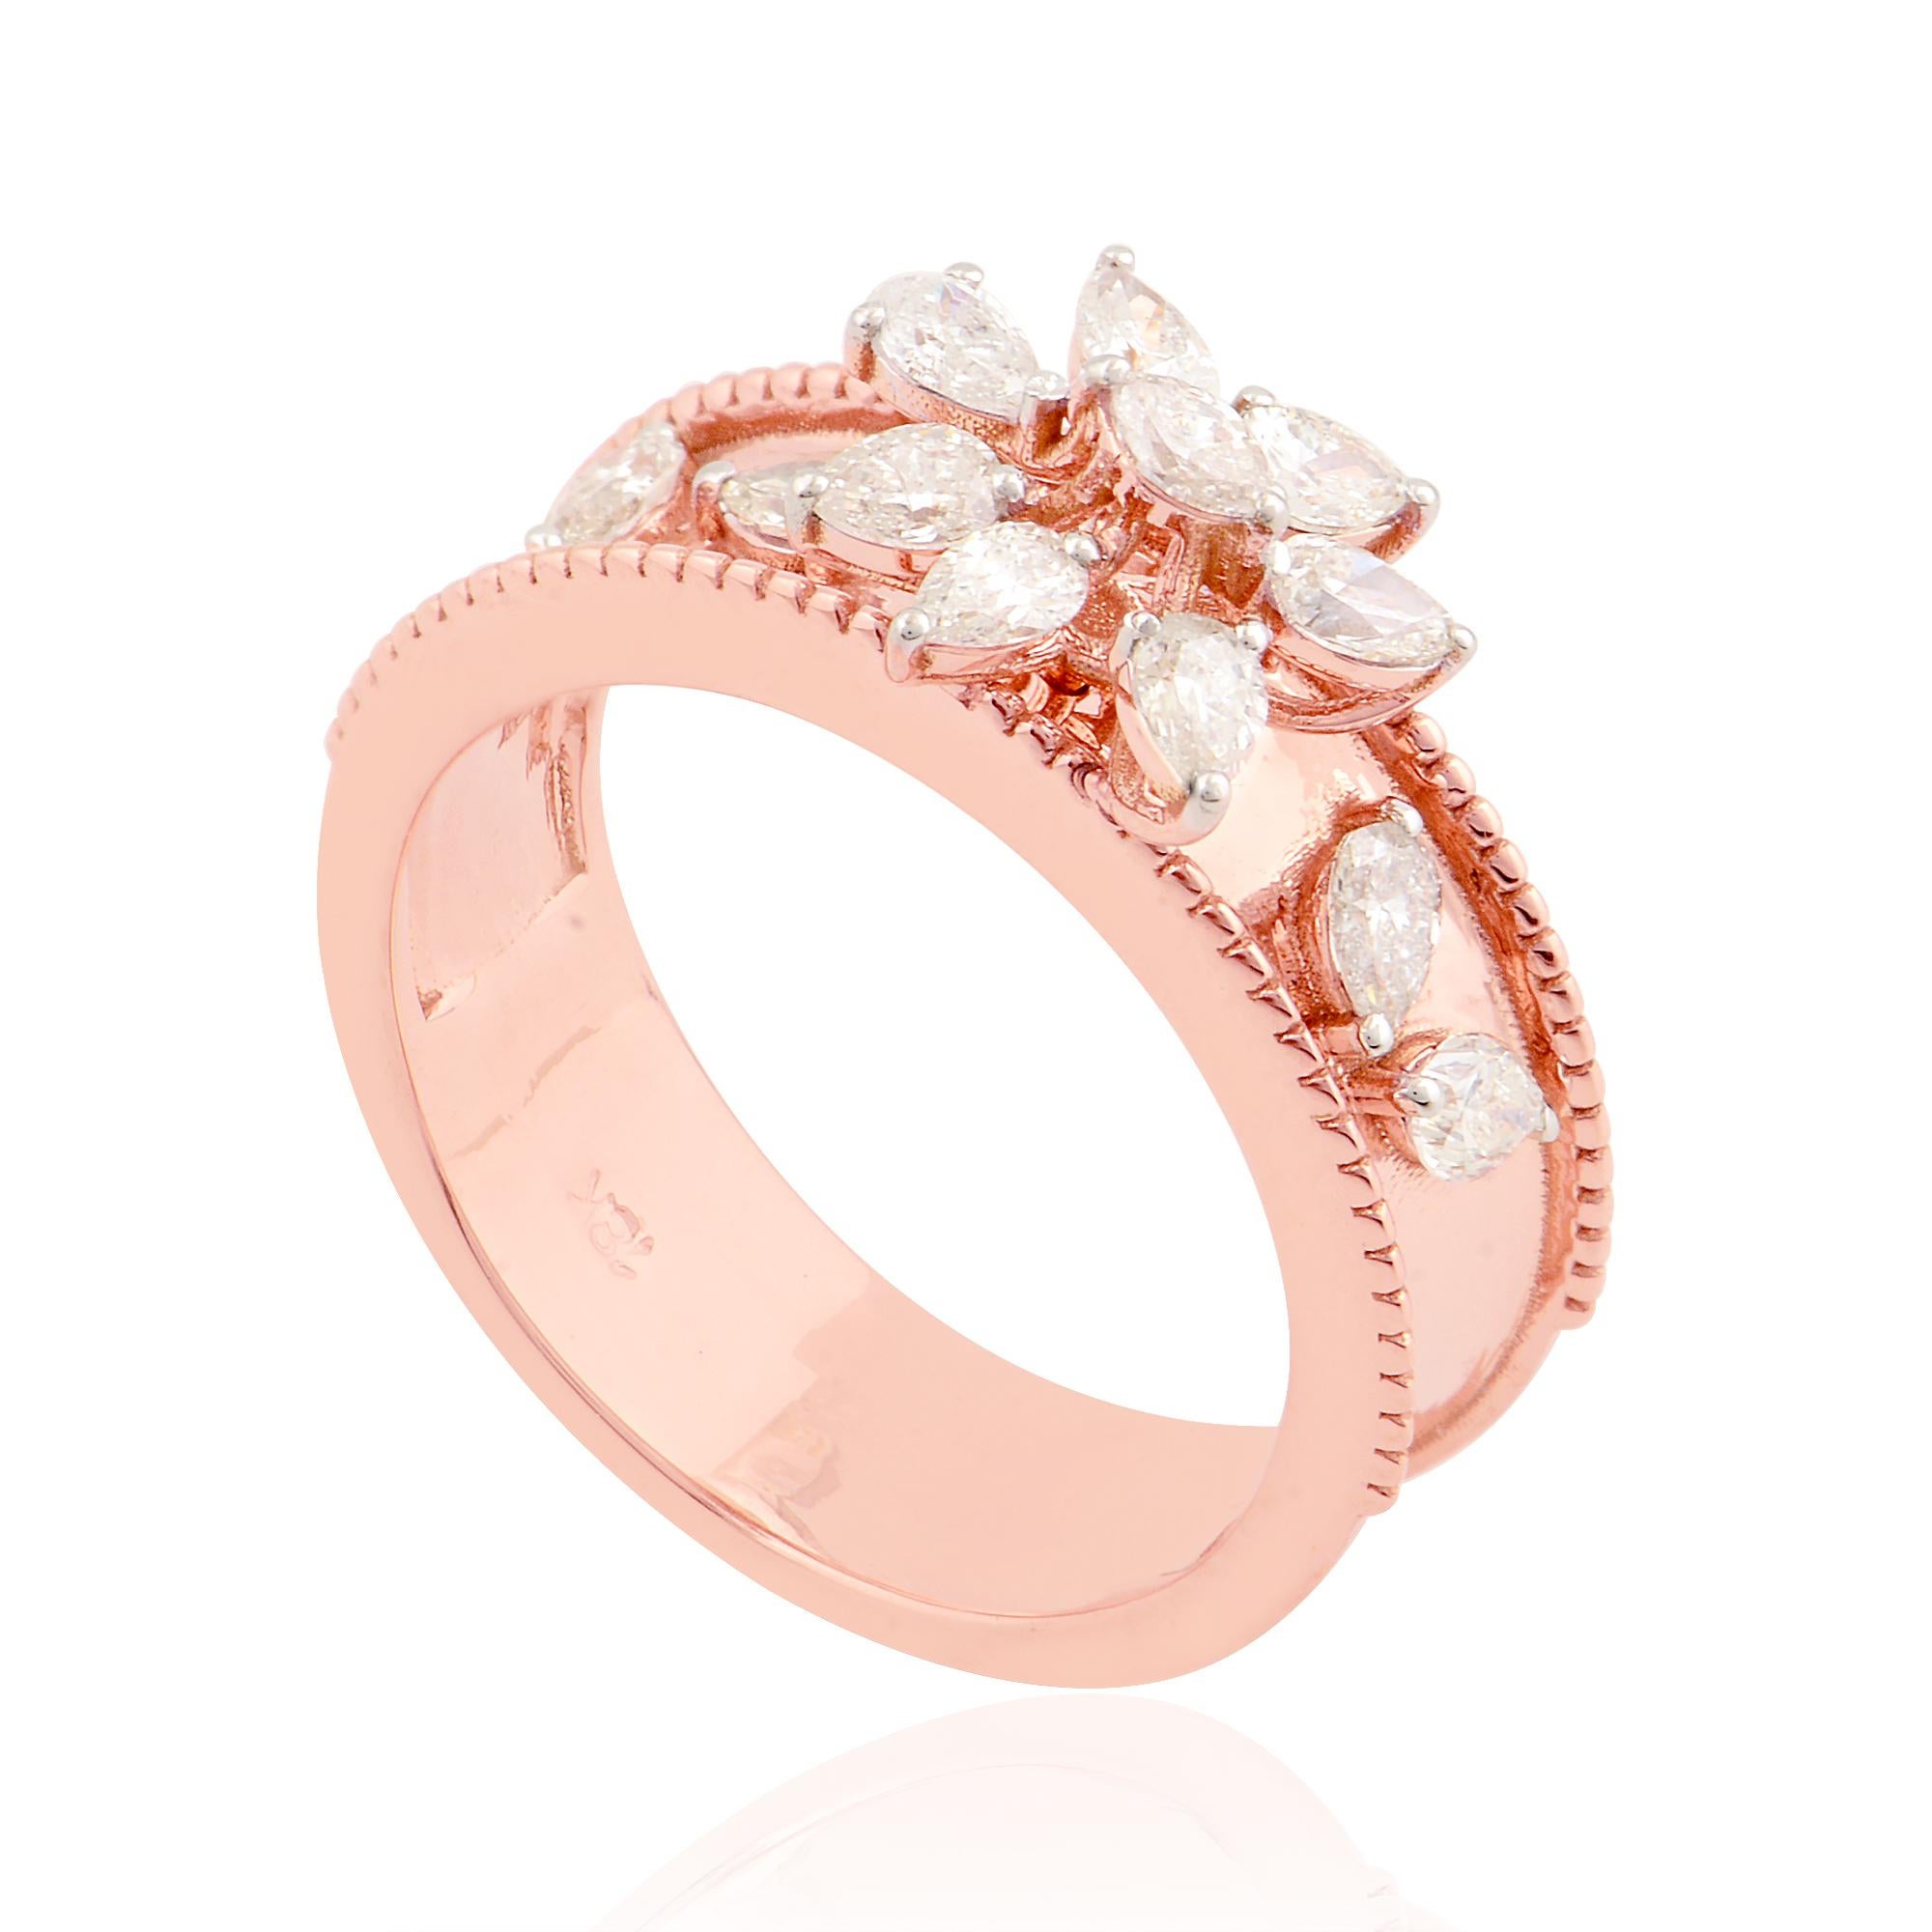 For Sale:  0.70 Carat Pear Marquise Diamond Band Ring Solid 18k Rose Gold Handmade Jewelry 3